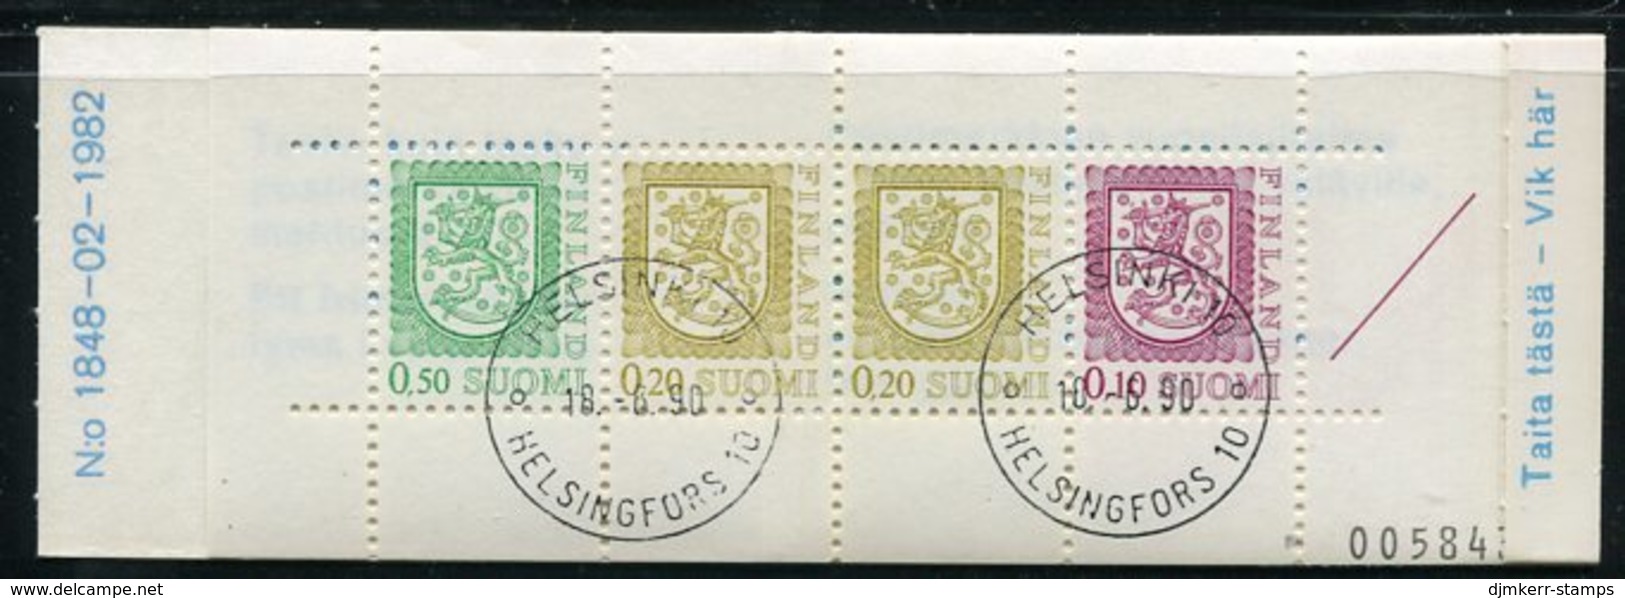 FINLAND 1983 Lion Definitive 1 Mk. Complete Booklet, Cancelled.  Michel MH 14 - Booklets